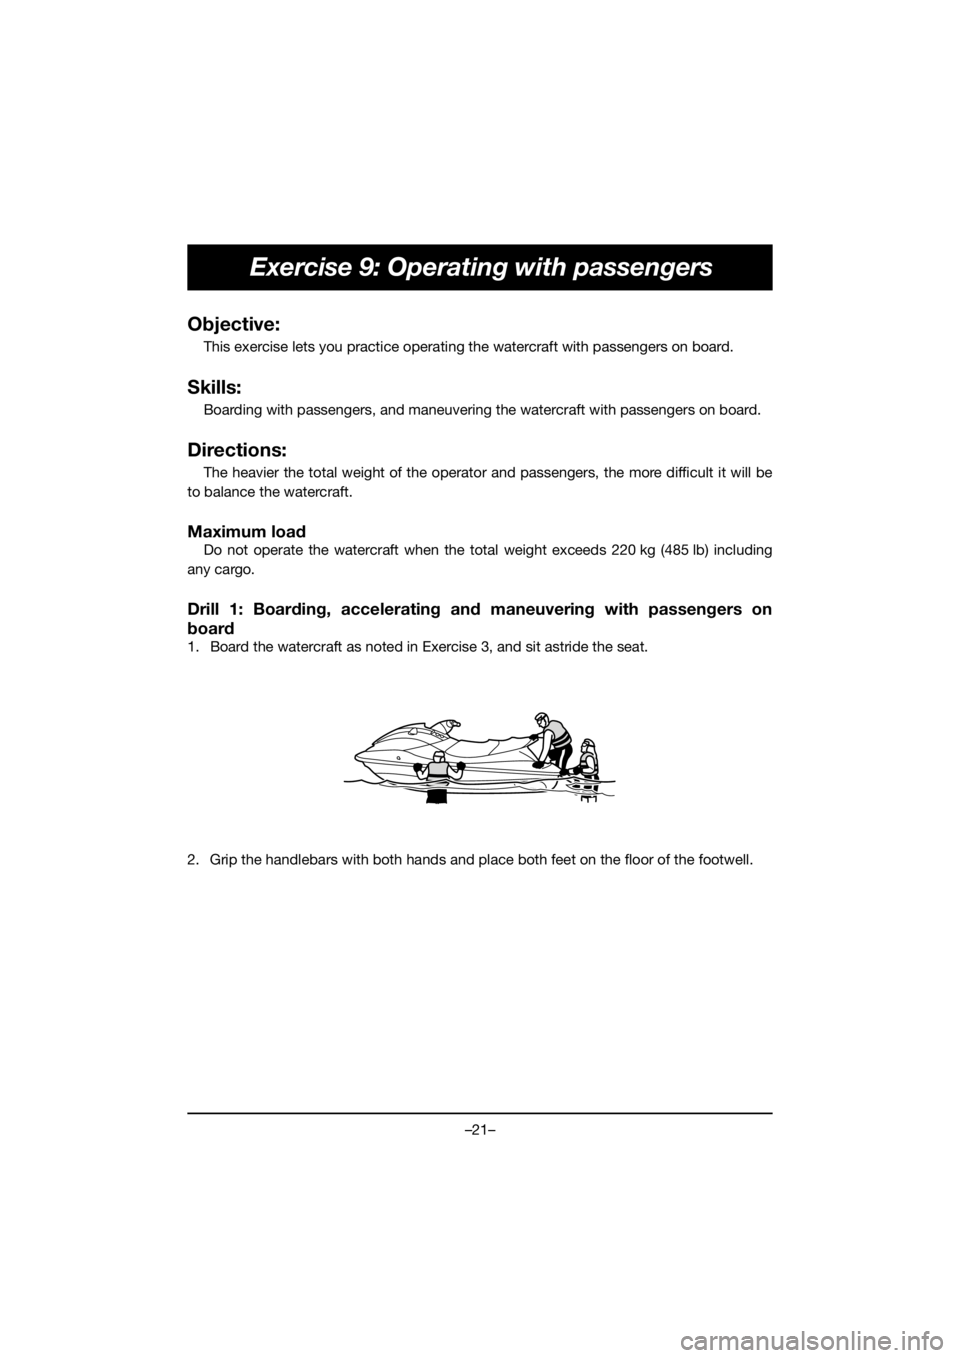 YAMAHA EX 2019  Manual de utilização (in Portuguese) –21–
Exercise 9: Operating with passengers
Objective:
This exercise lets you practice operating the watercraft with passengers on board.
Skills:
Boarding with passengers, and maneuvering the water